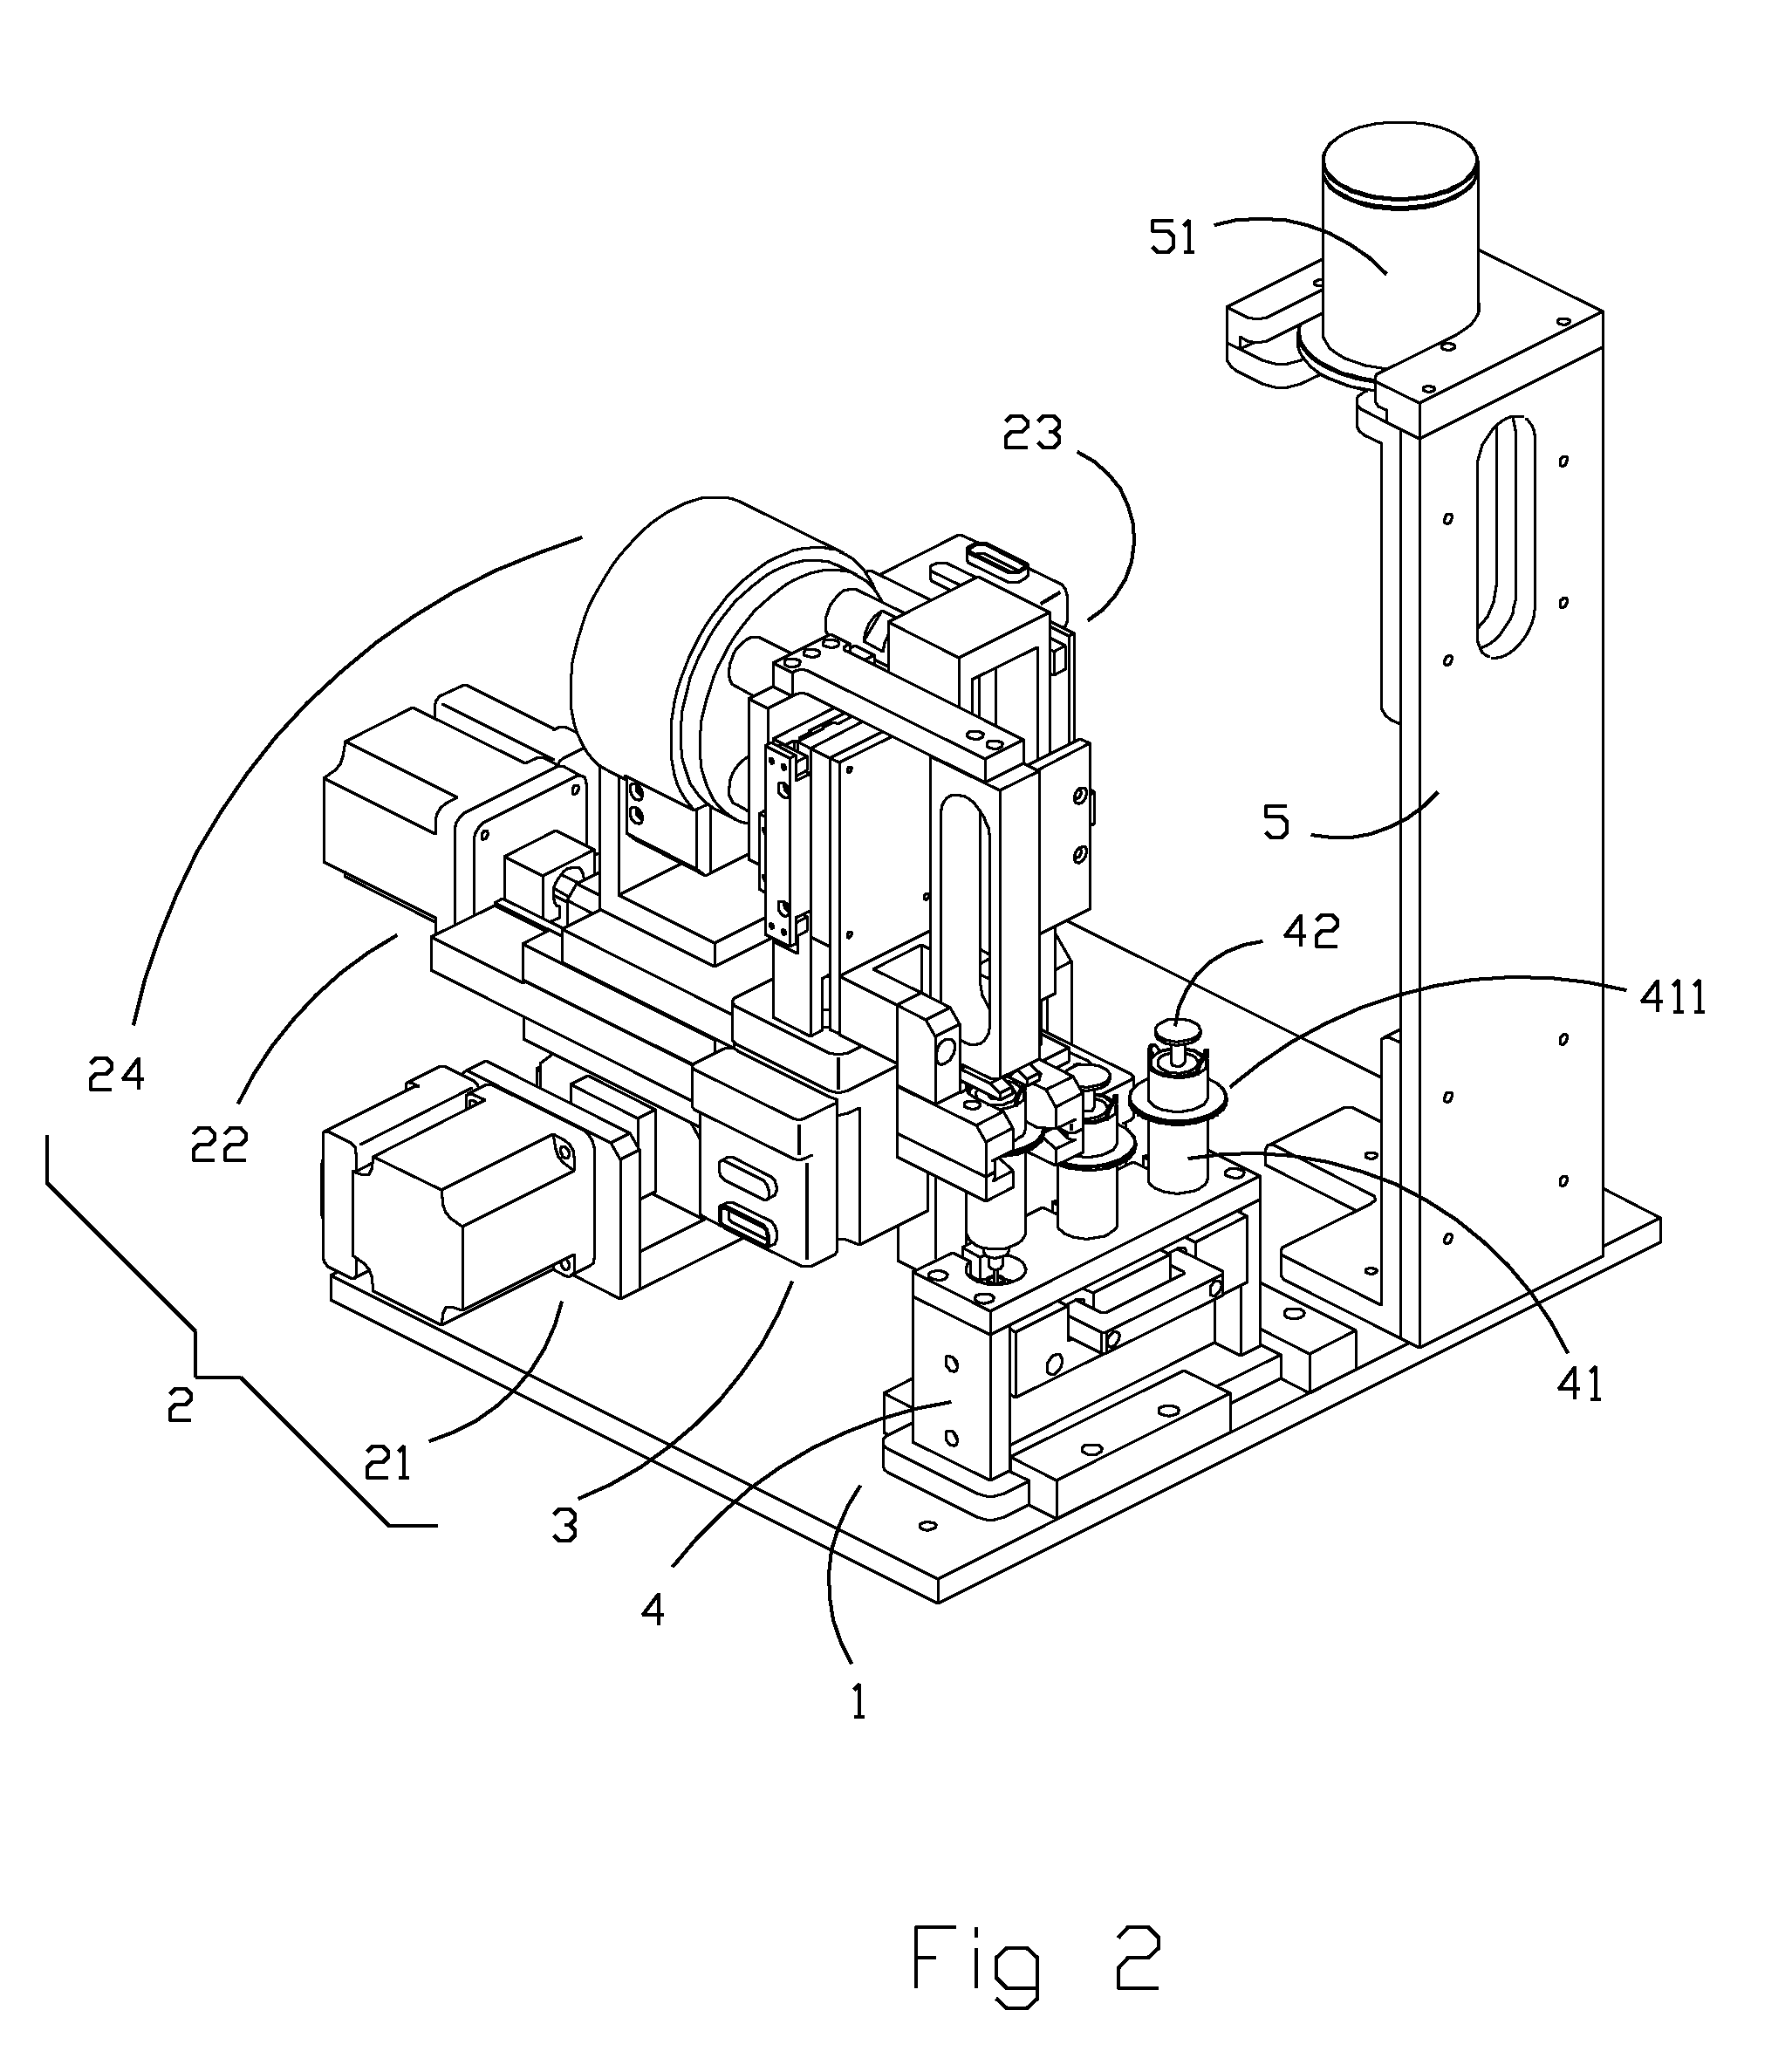 Automated dispenser for radiopharmaceuticals